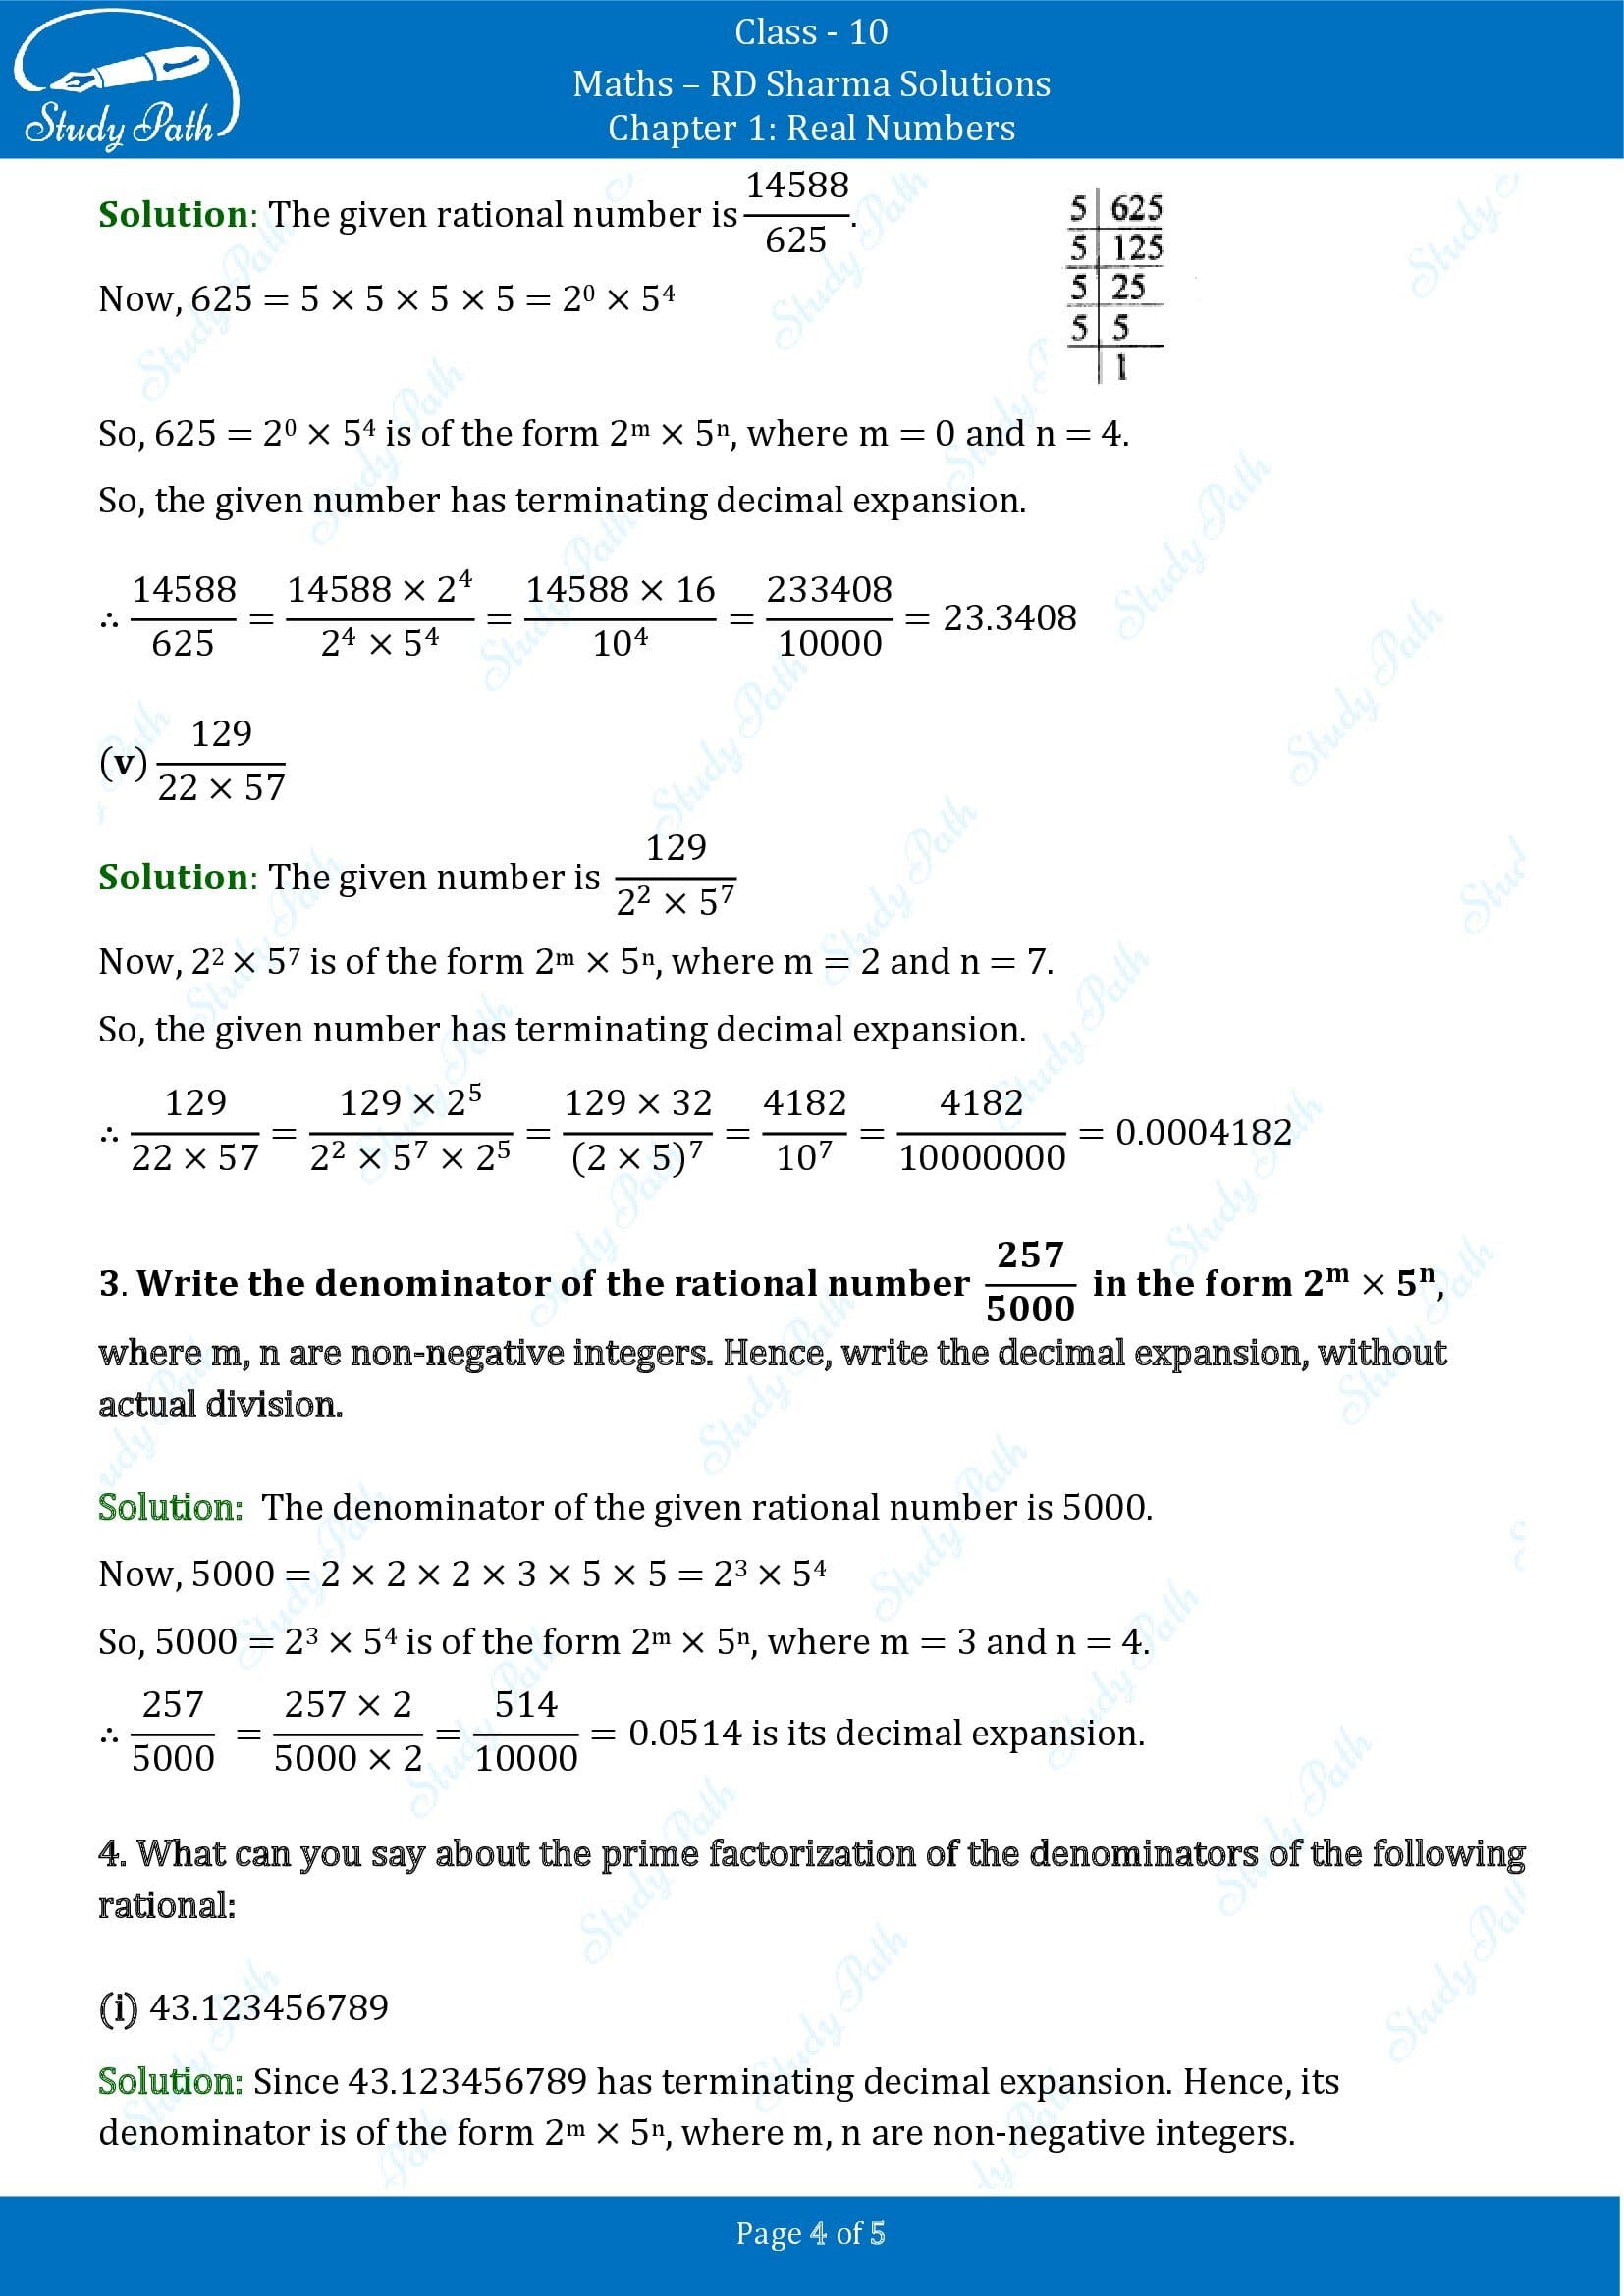 RD Sharma Solutions Class 10 Chapter 1 Real Numbers Exercise 1.6 00004